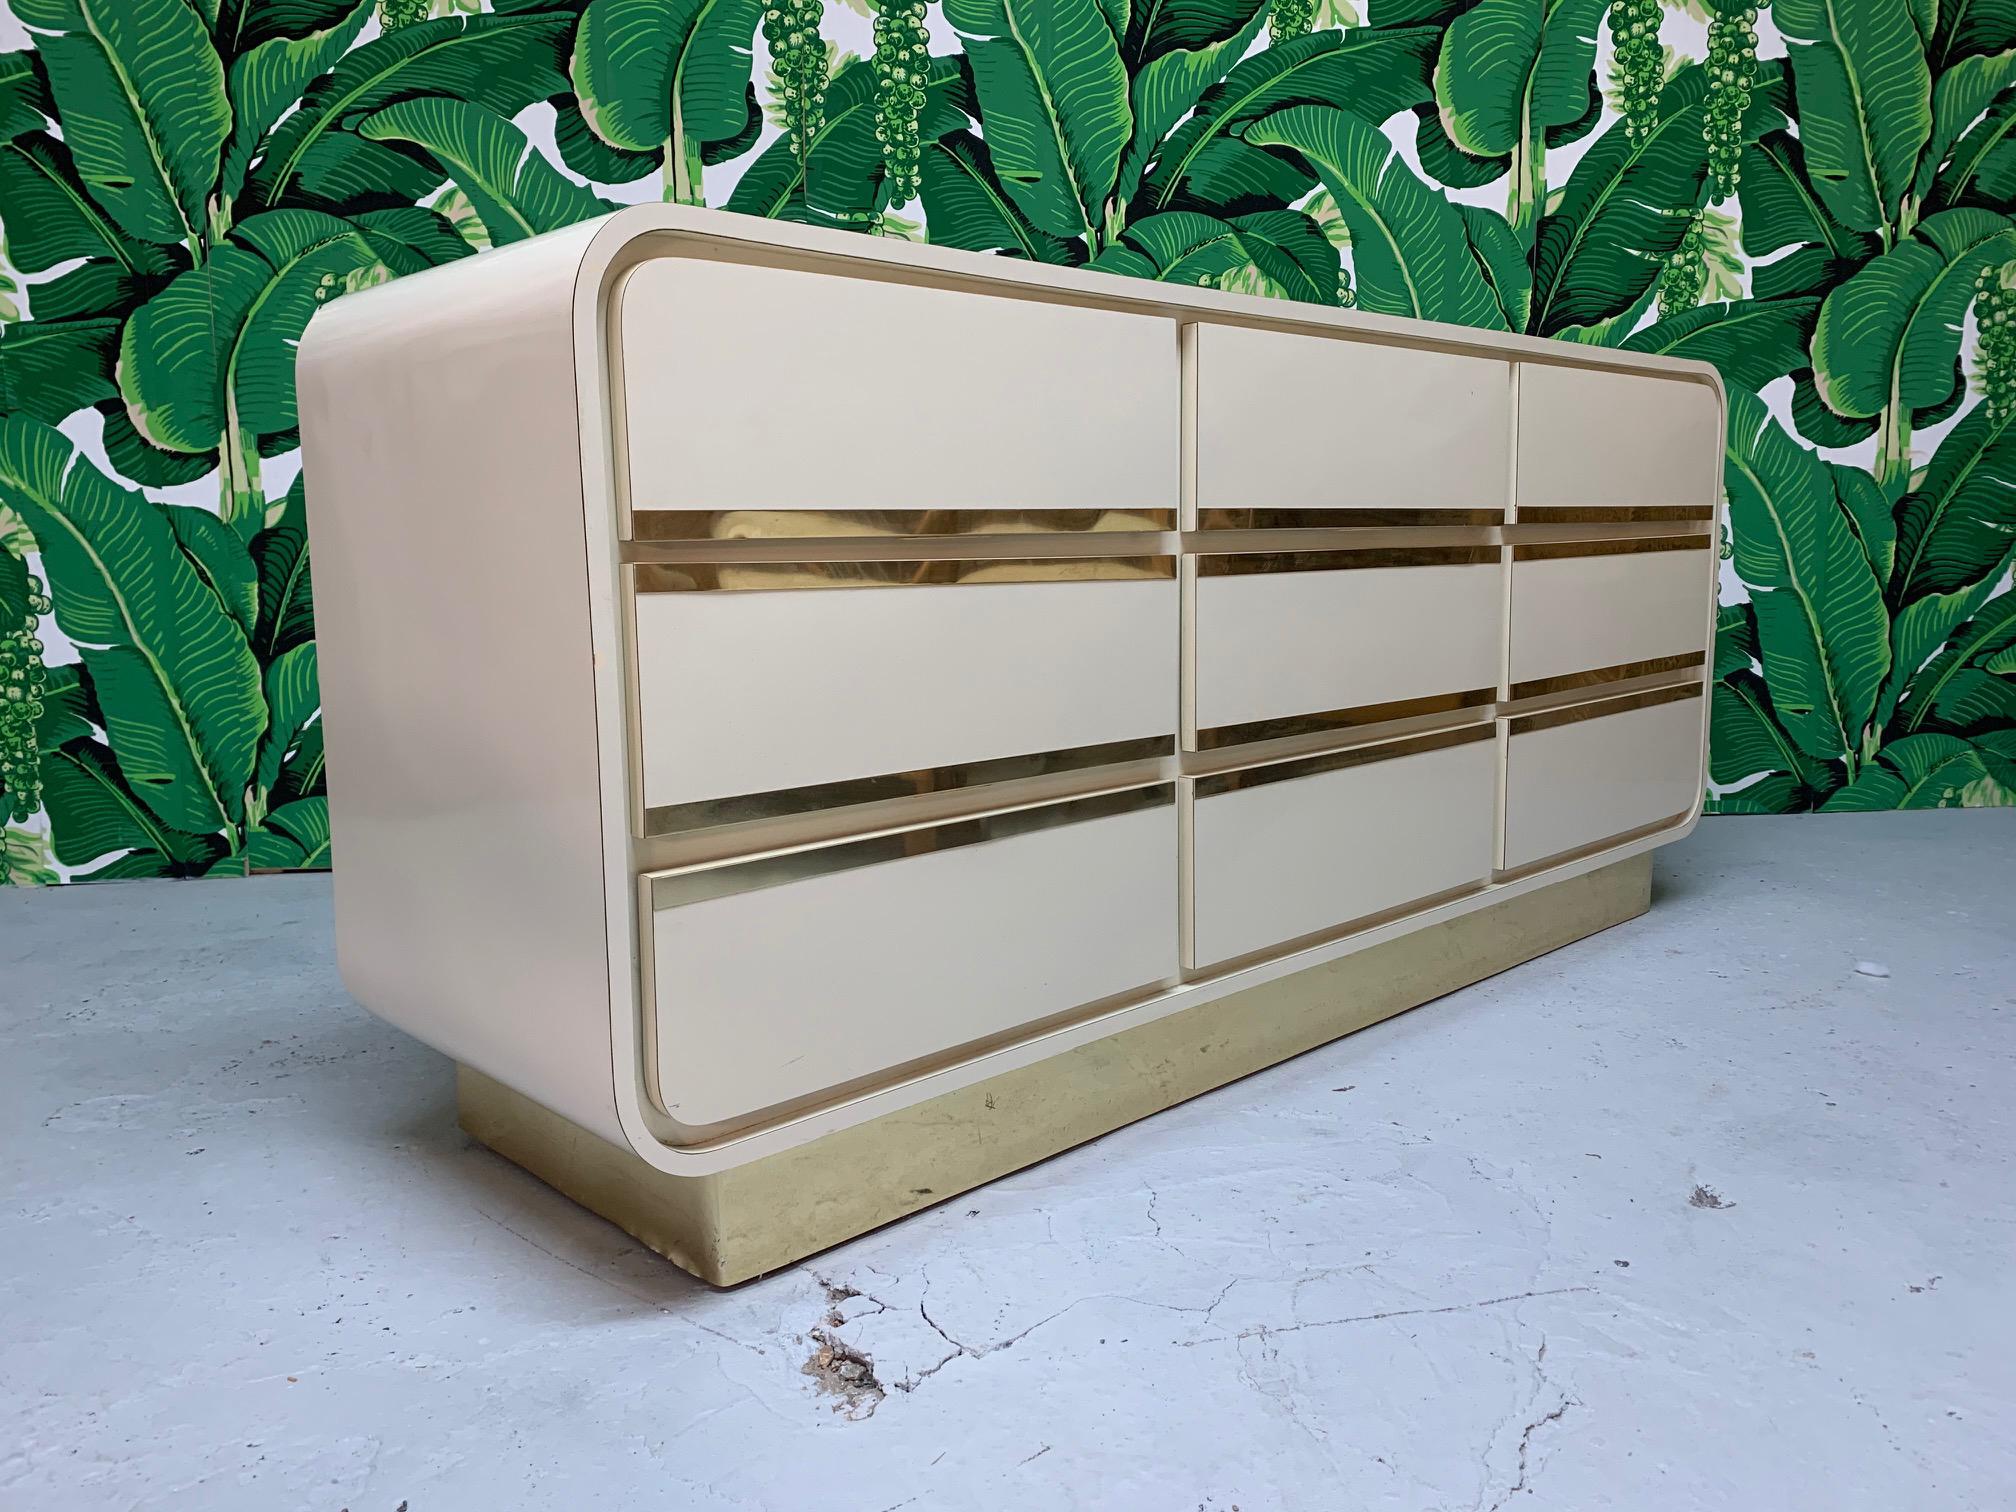 1980s art deco style dresser features waterfall shape and brass detailing on drawer fronts and a brass plinth (brass shim veneer). Very good vintage condition with minor imperfections consistent with age.